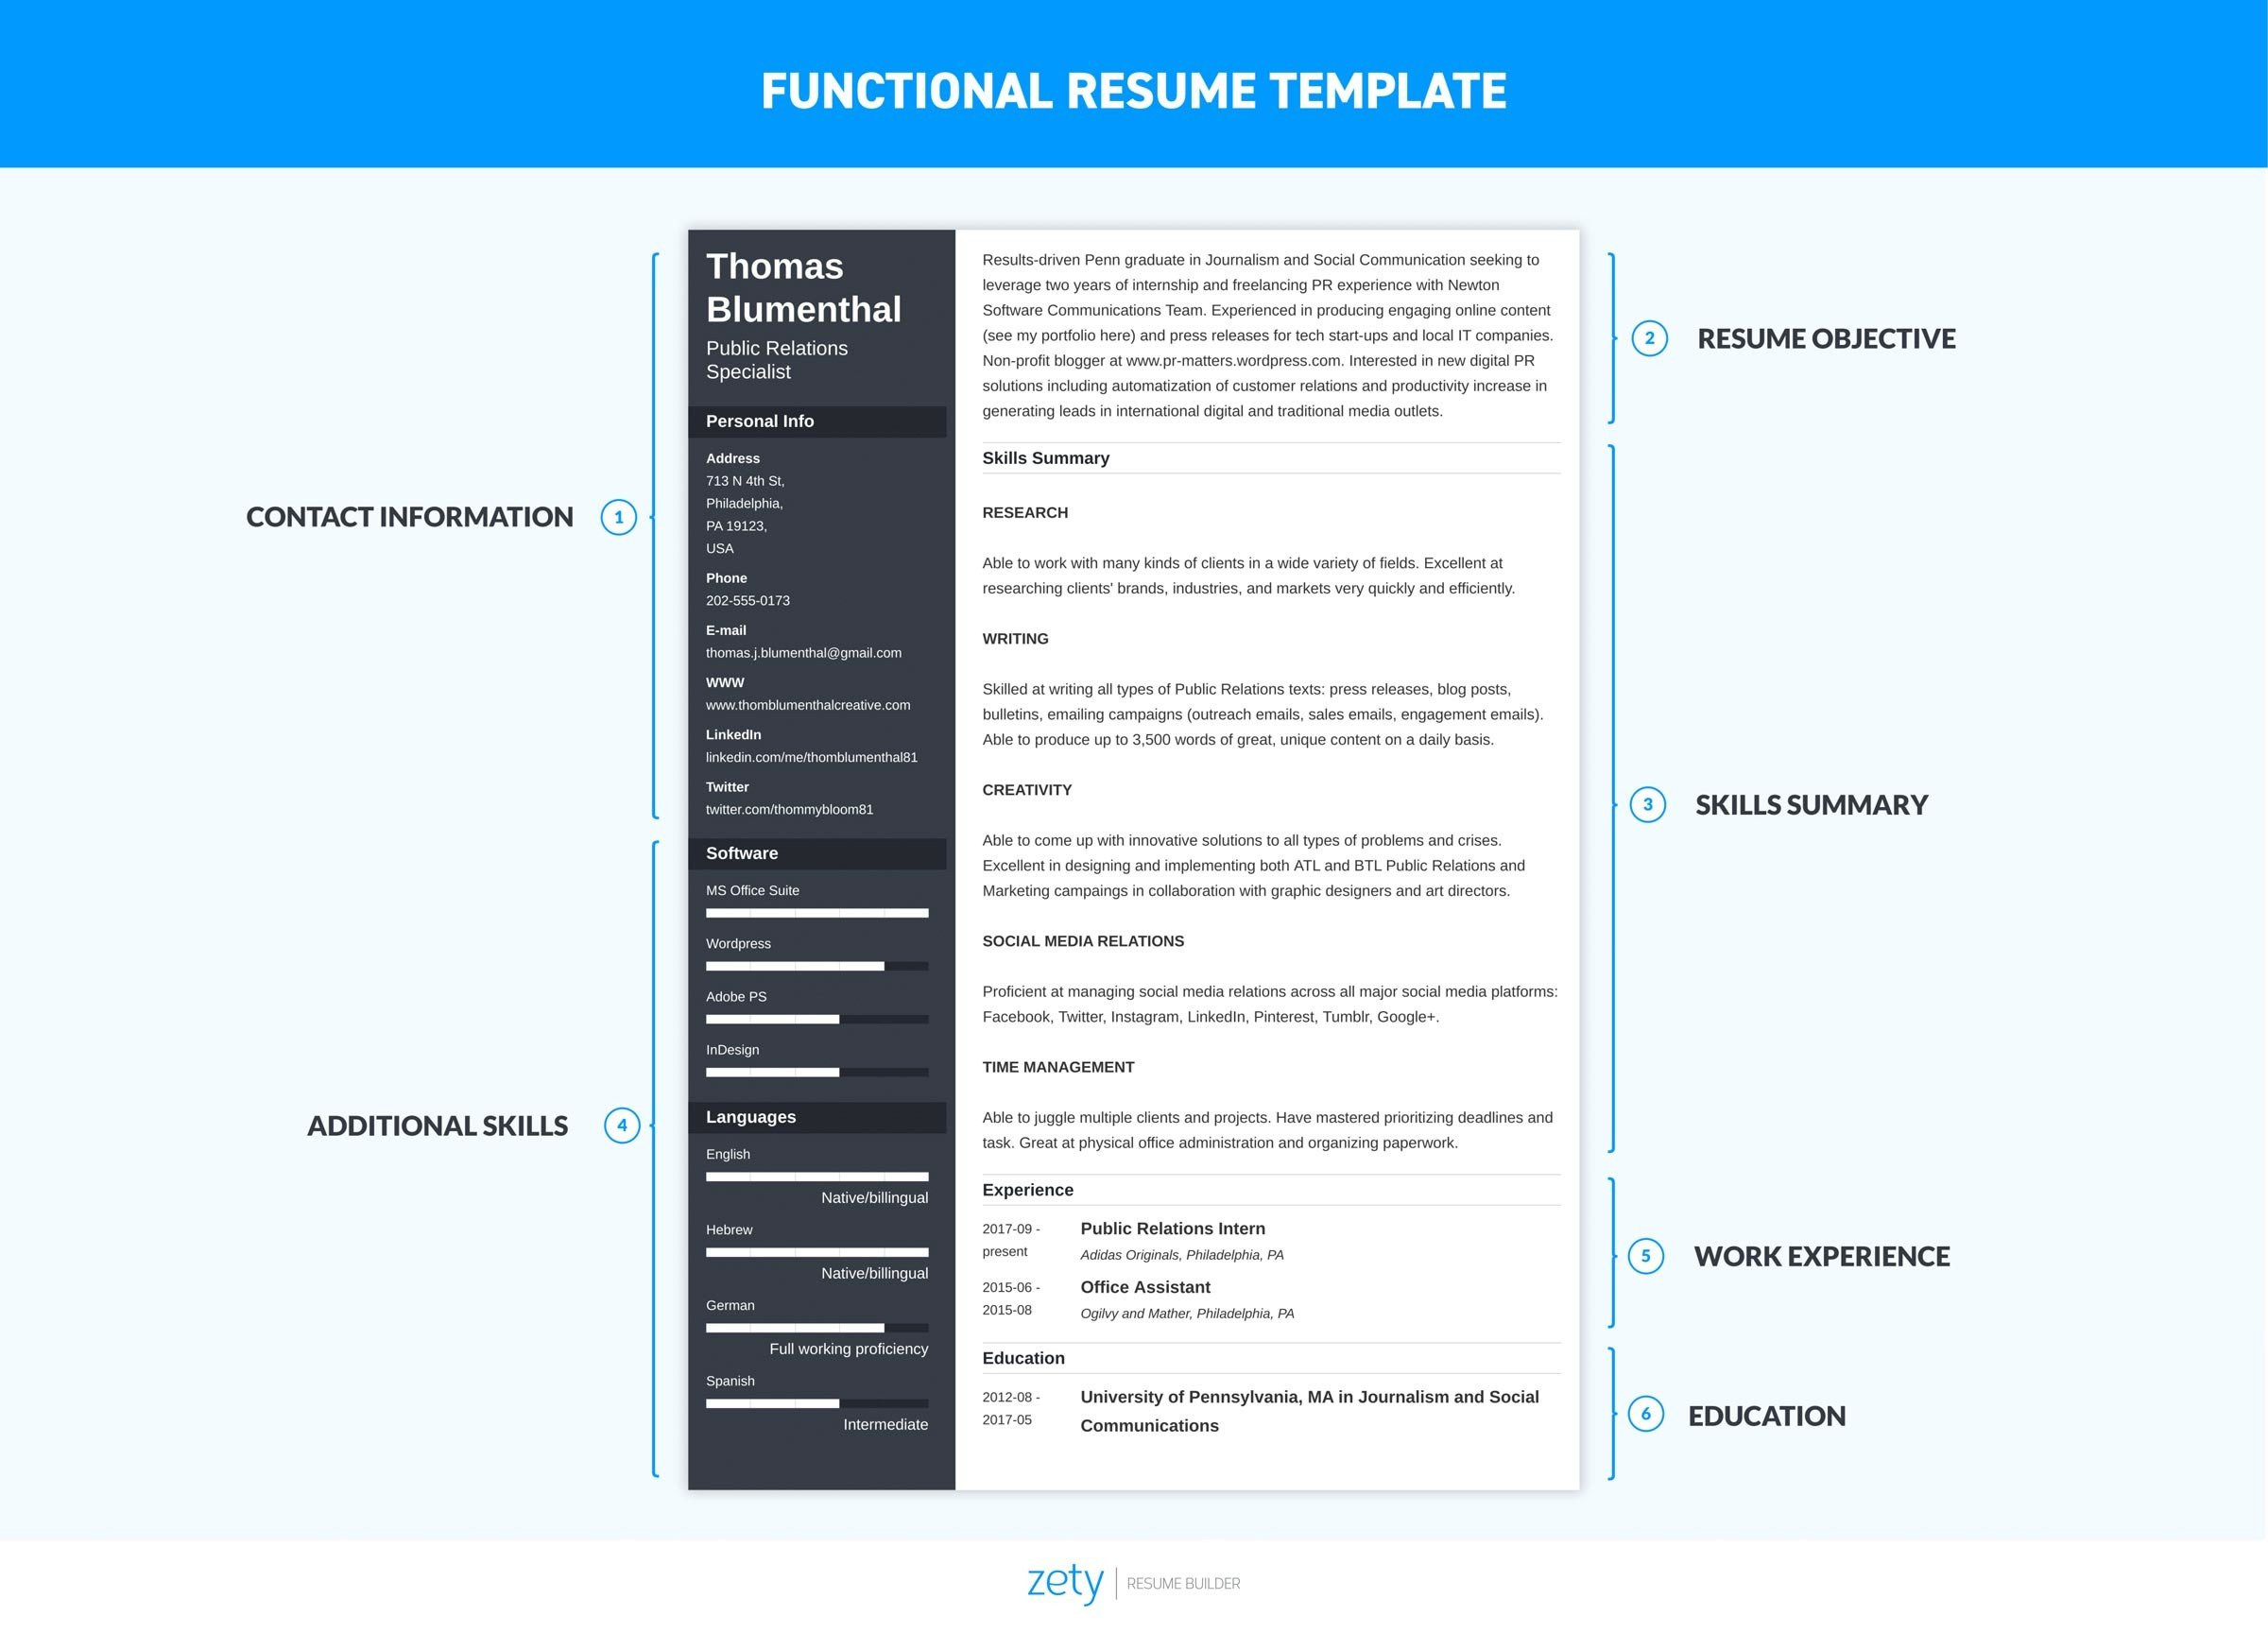 Fill In the Blank Functional Resume Template Functional Resume: Examples & Skills Based Templates